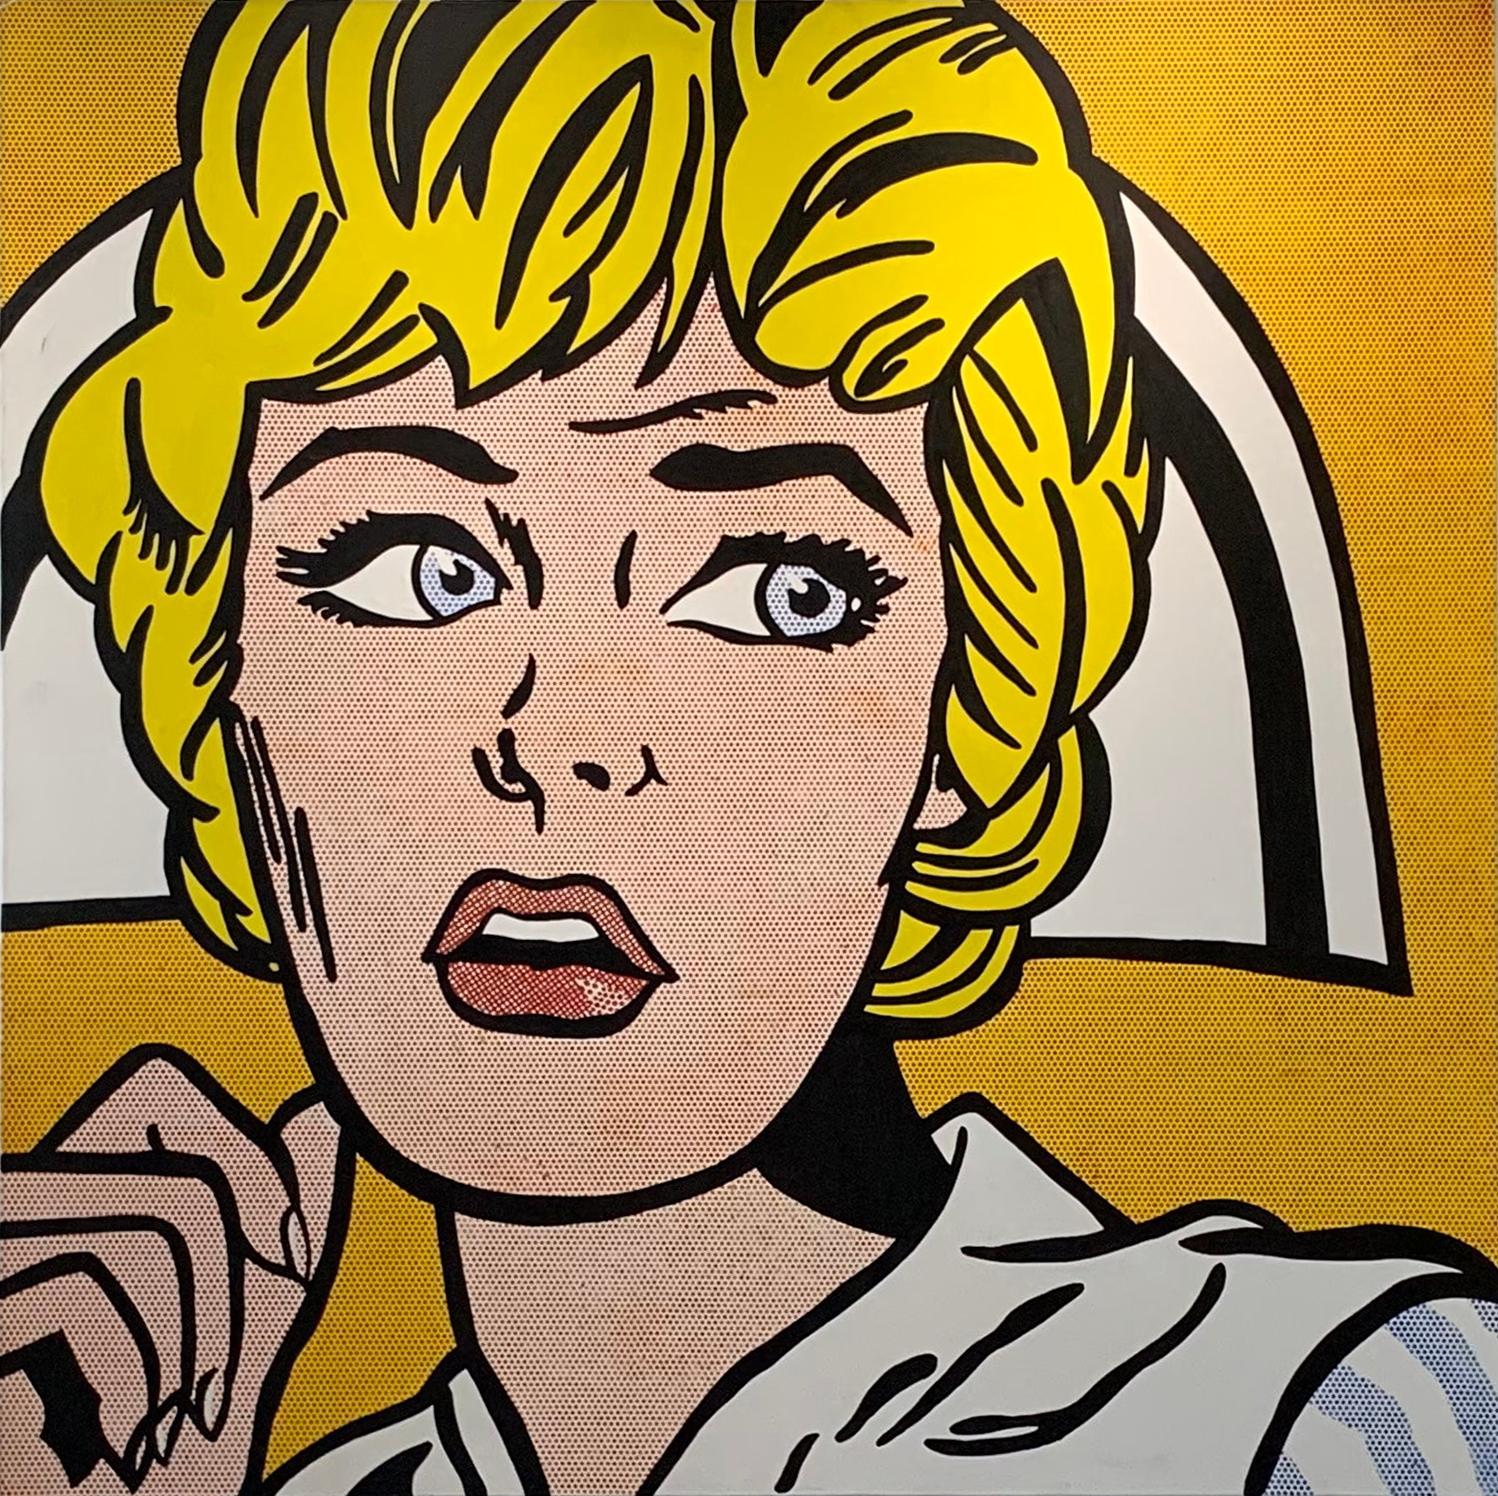 Pop Art painting girl with blond hair based on Roy Lichtenstein - Painting by Unknown